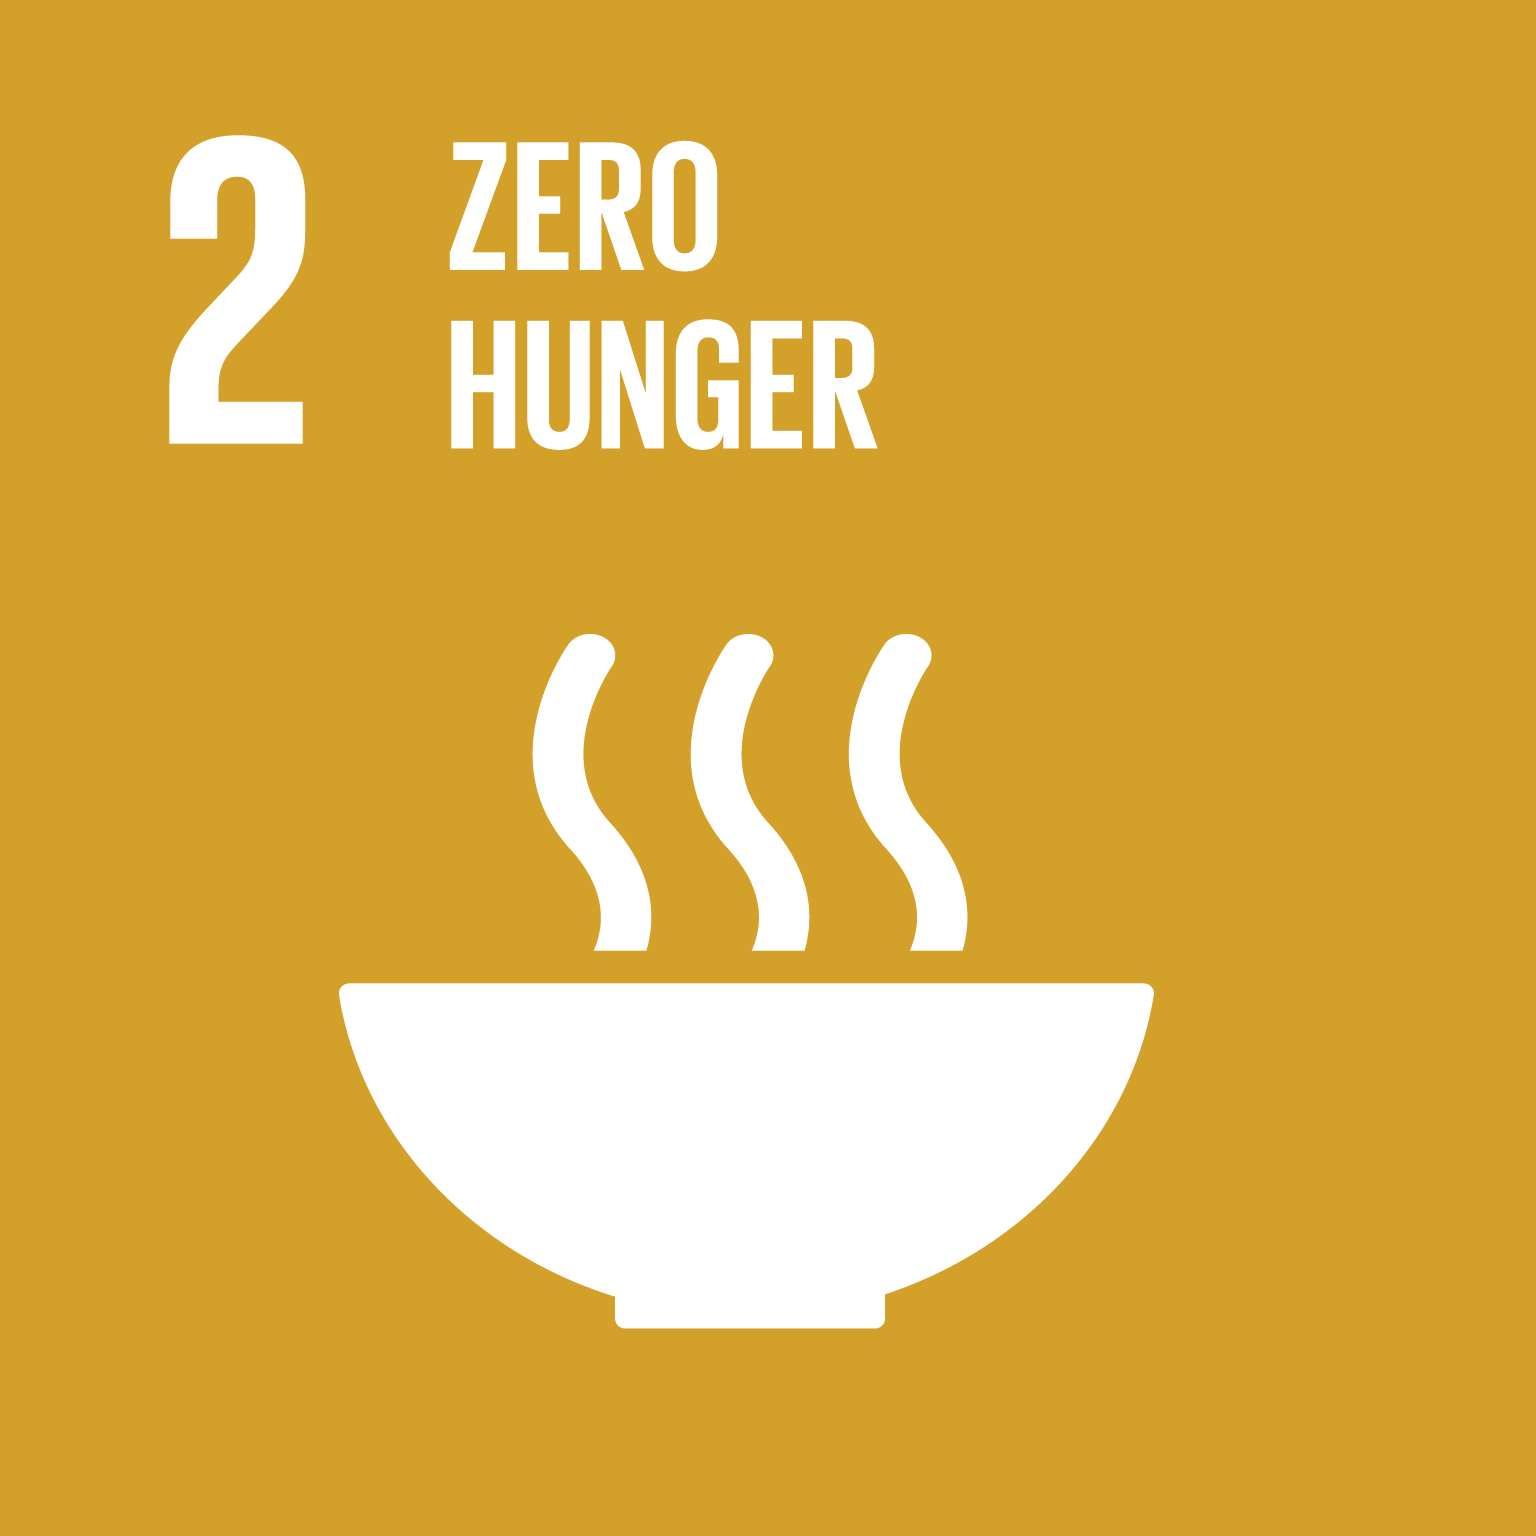 Goal 2: Zero Hunger - End hunger, achieve food security and improved nutrition and promote sustainable agriculture